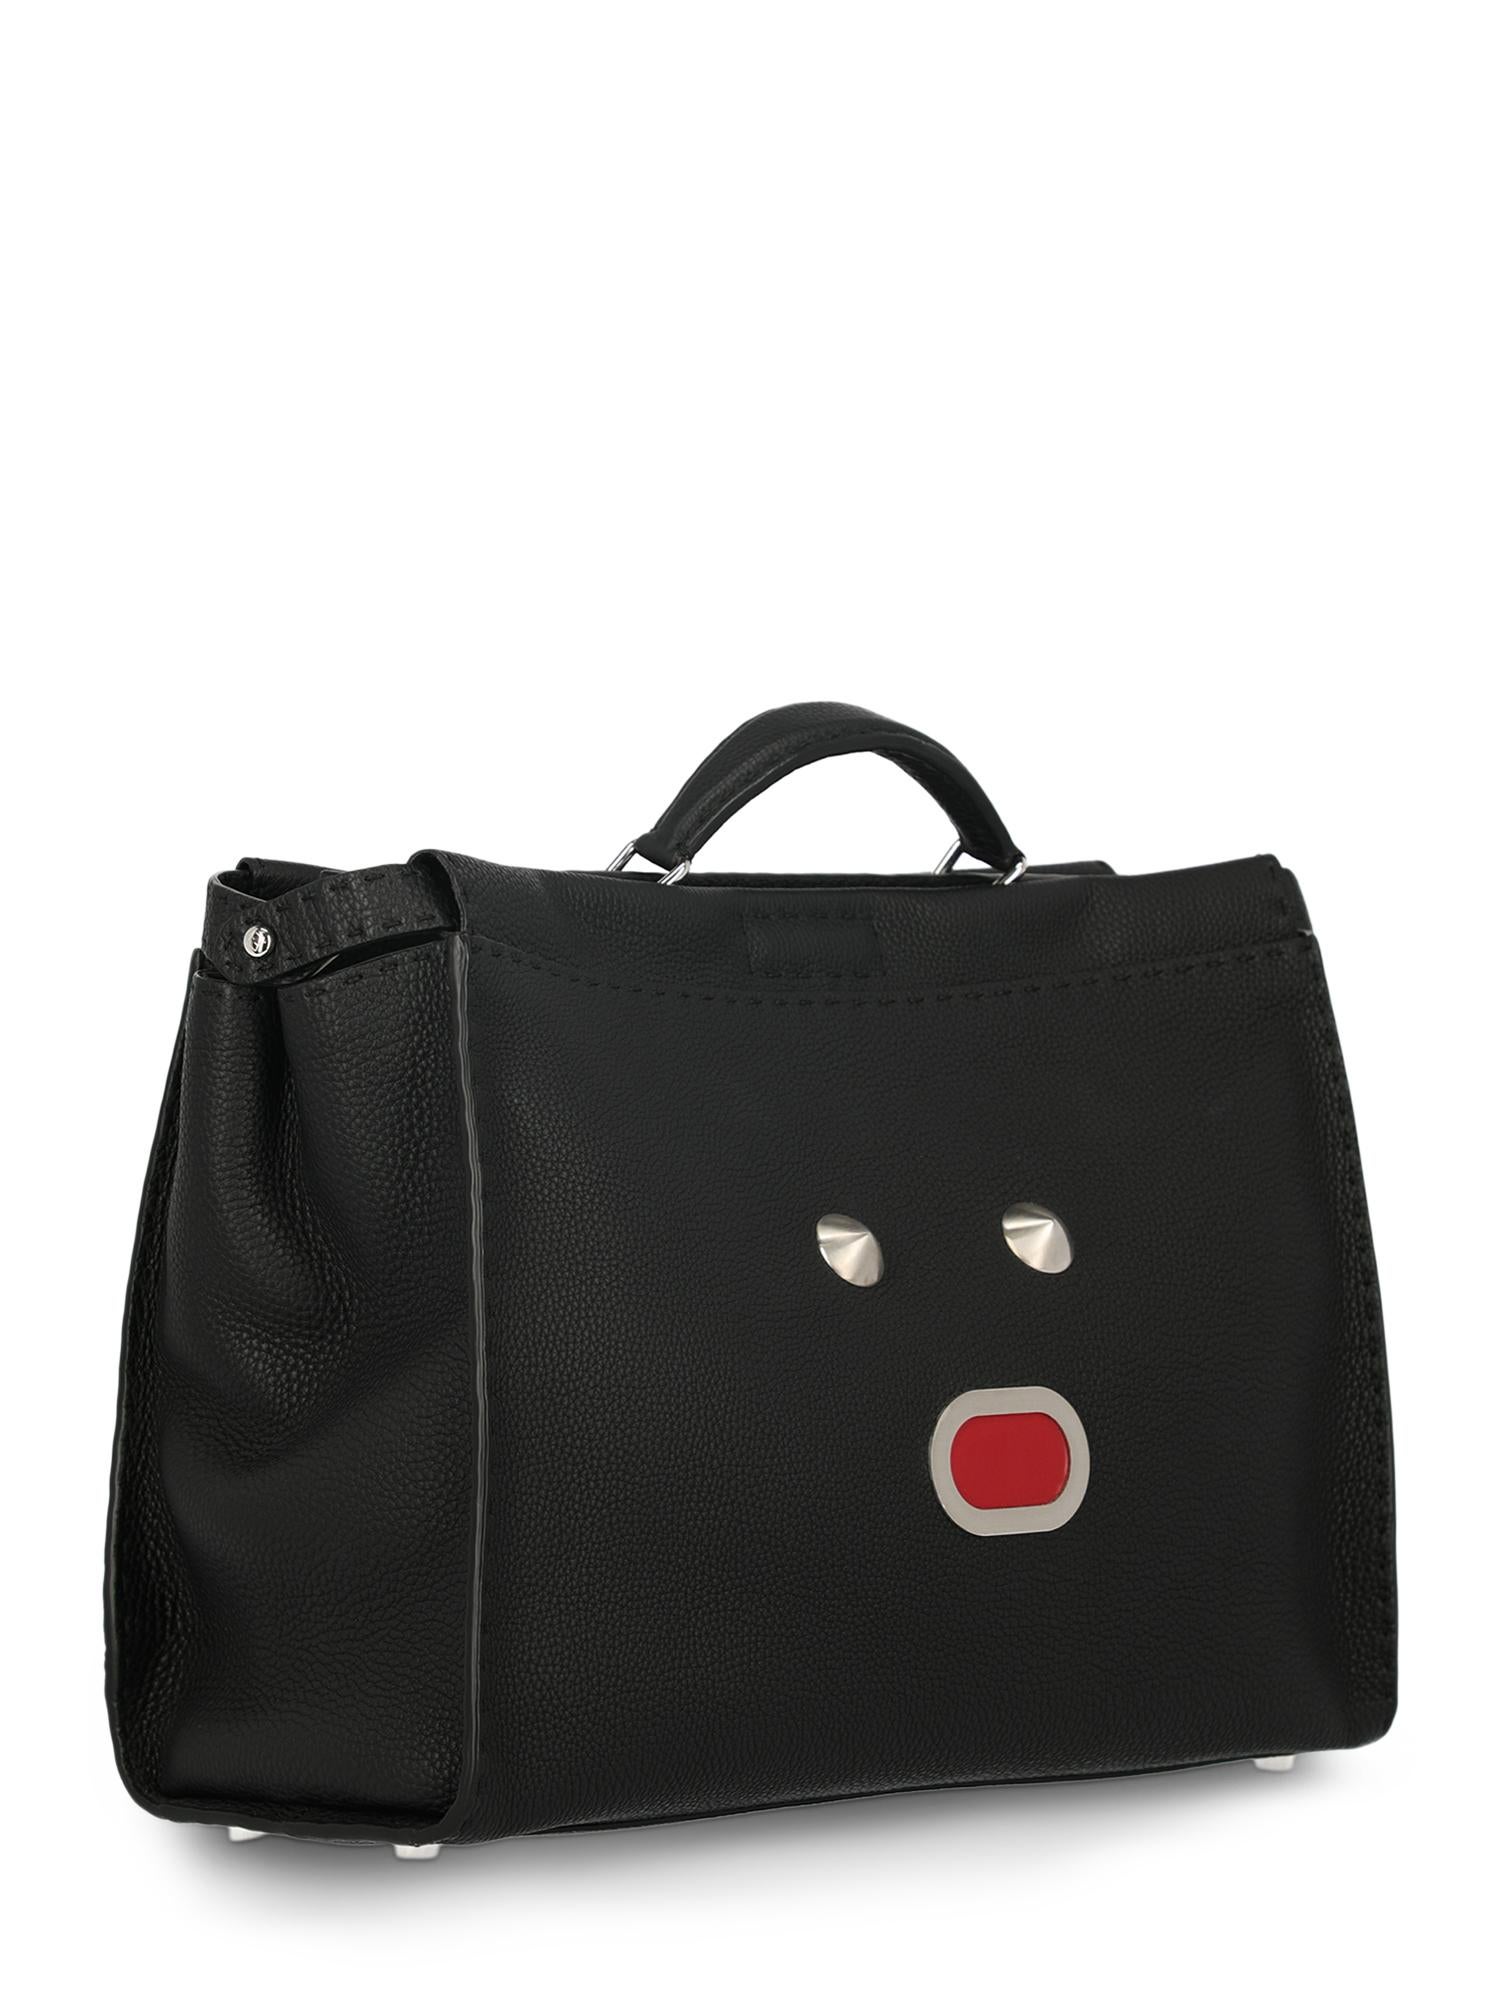 Fendi Woman Peekaboo Black  In Excellent Condition For Sale In Milan, IT